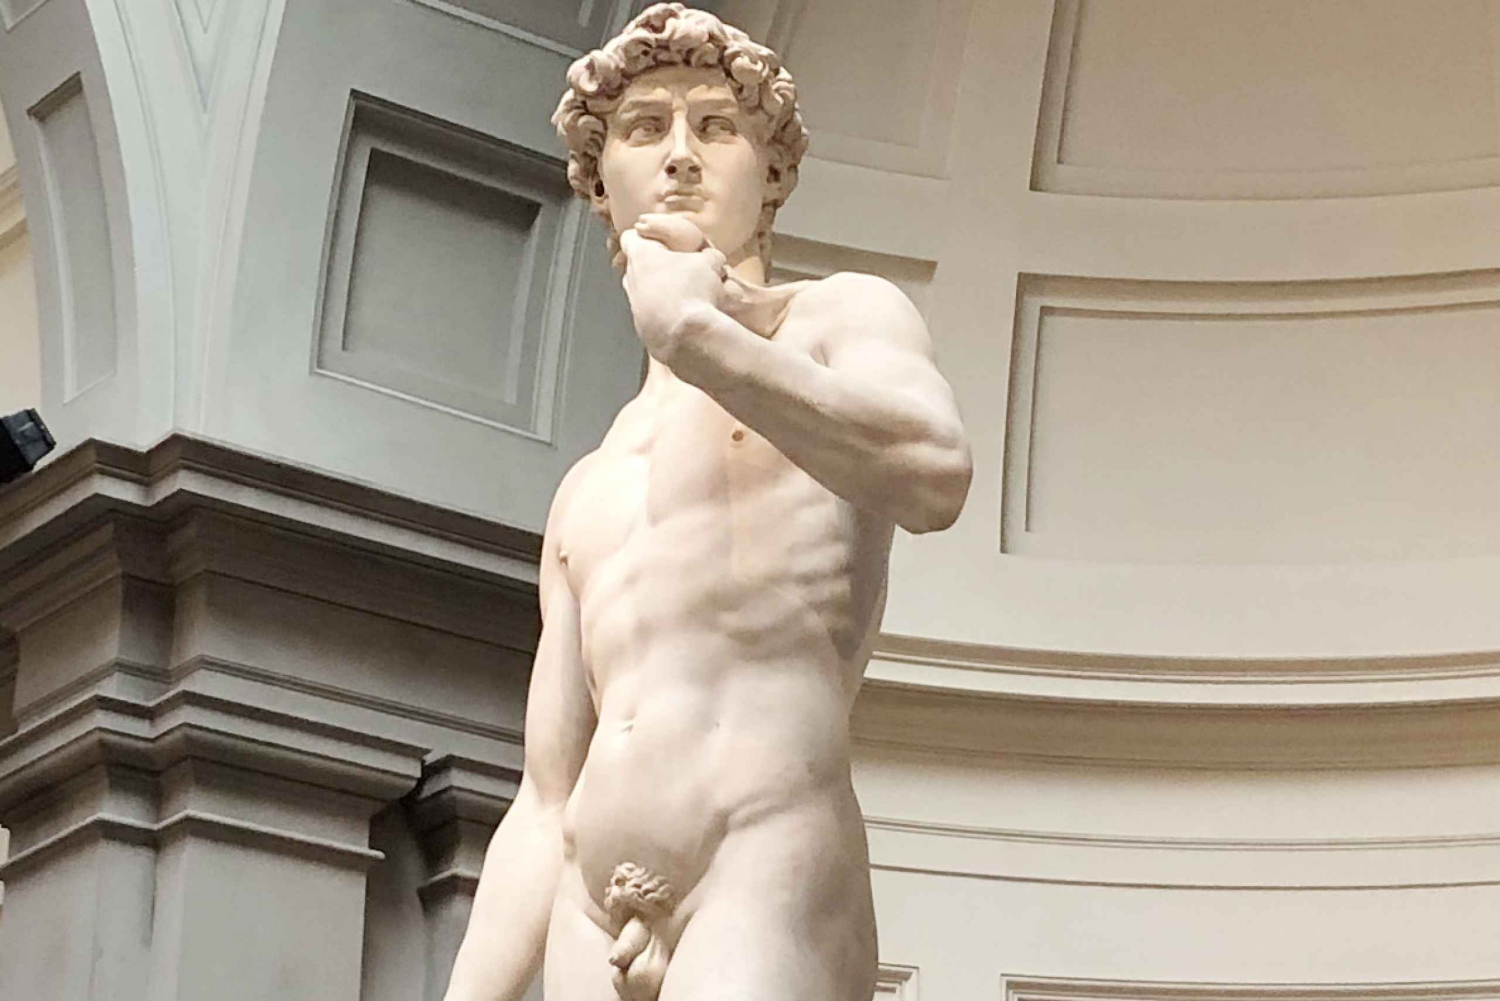 Florence: Accademia Gallery & David Statue Small-Group Tour